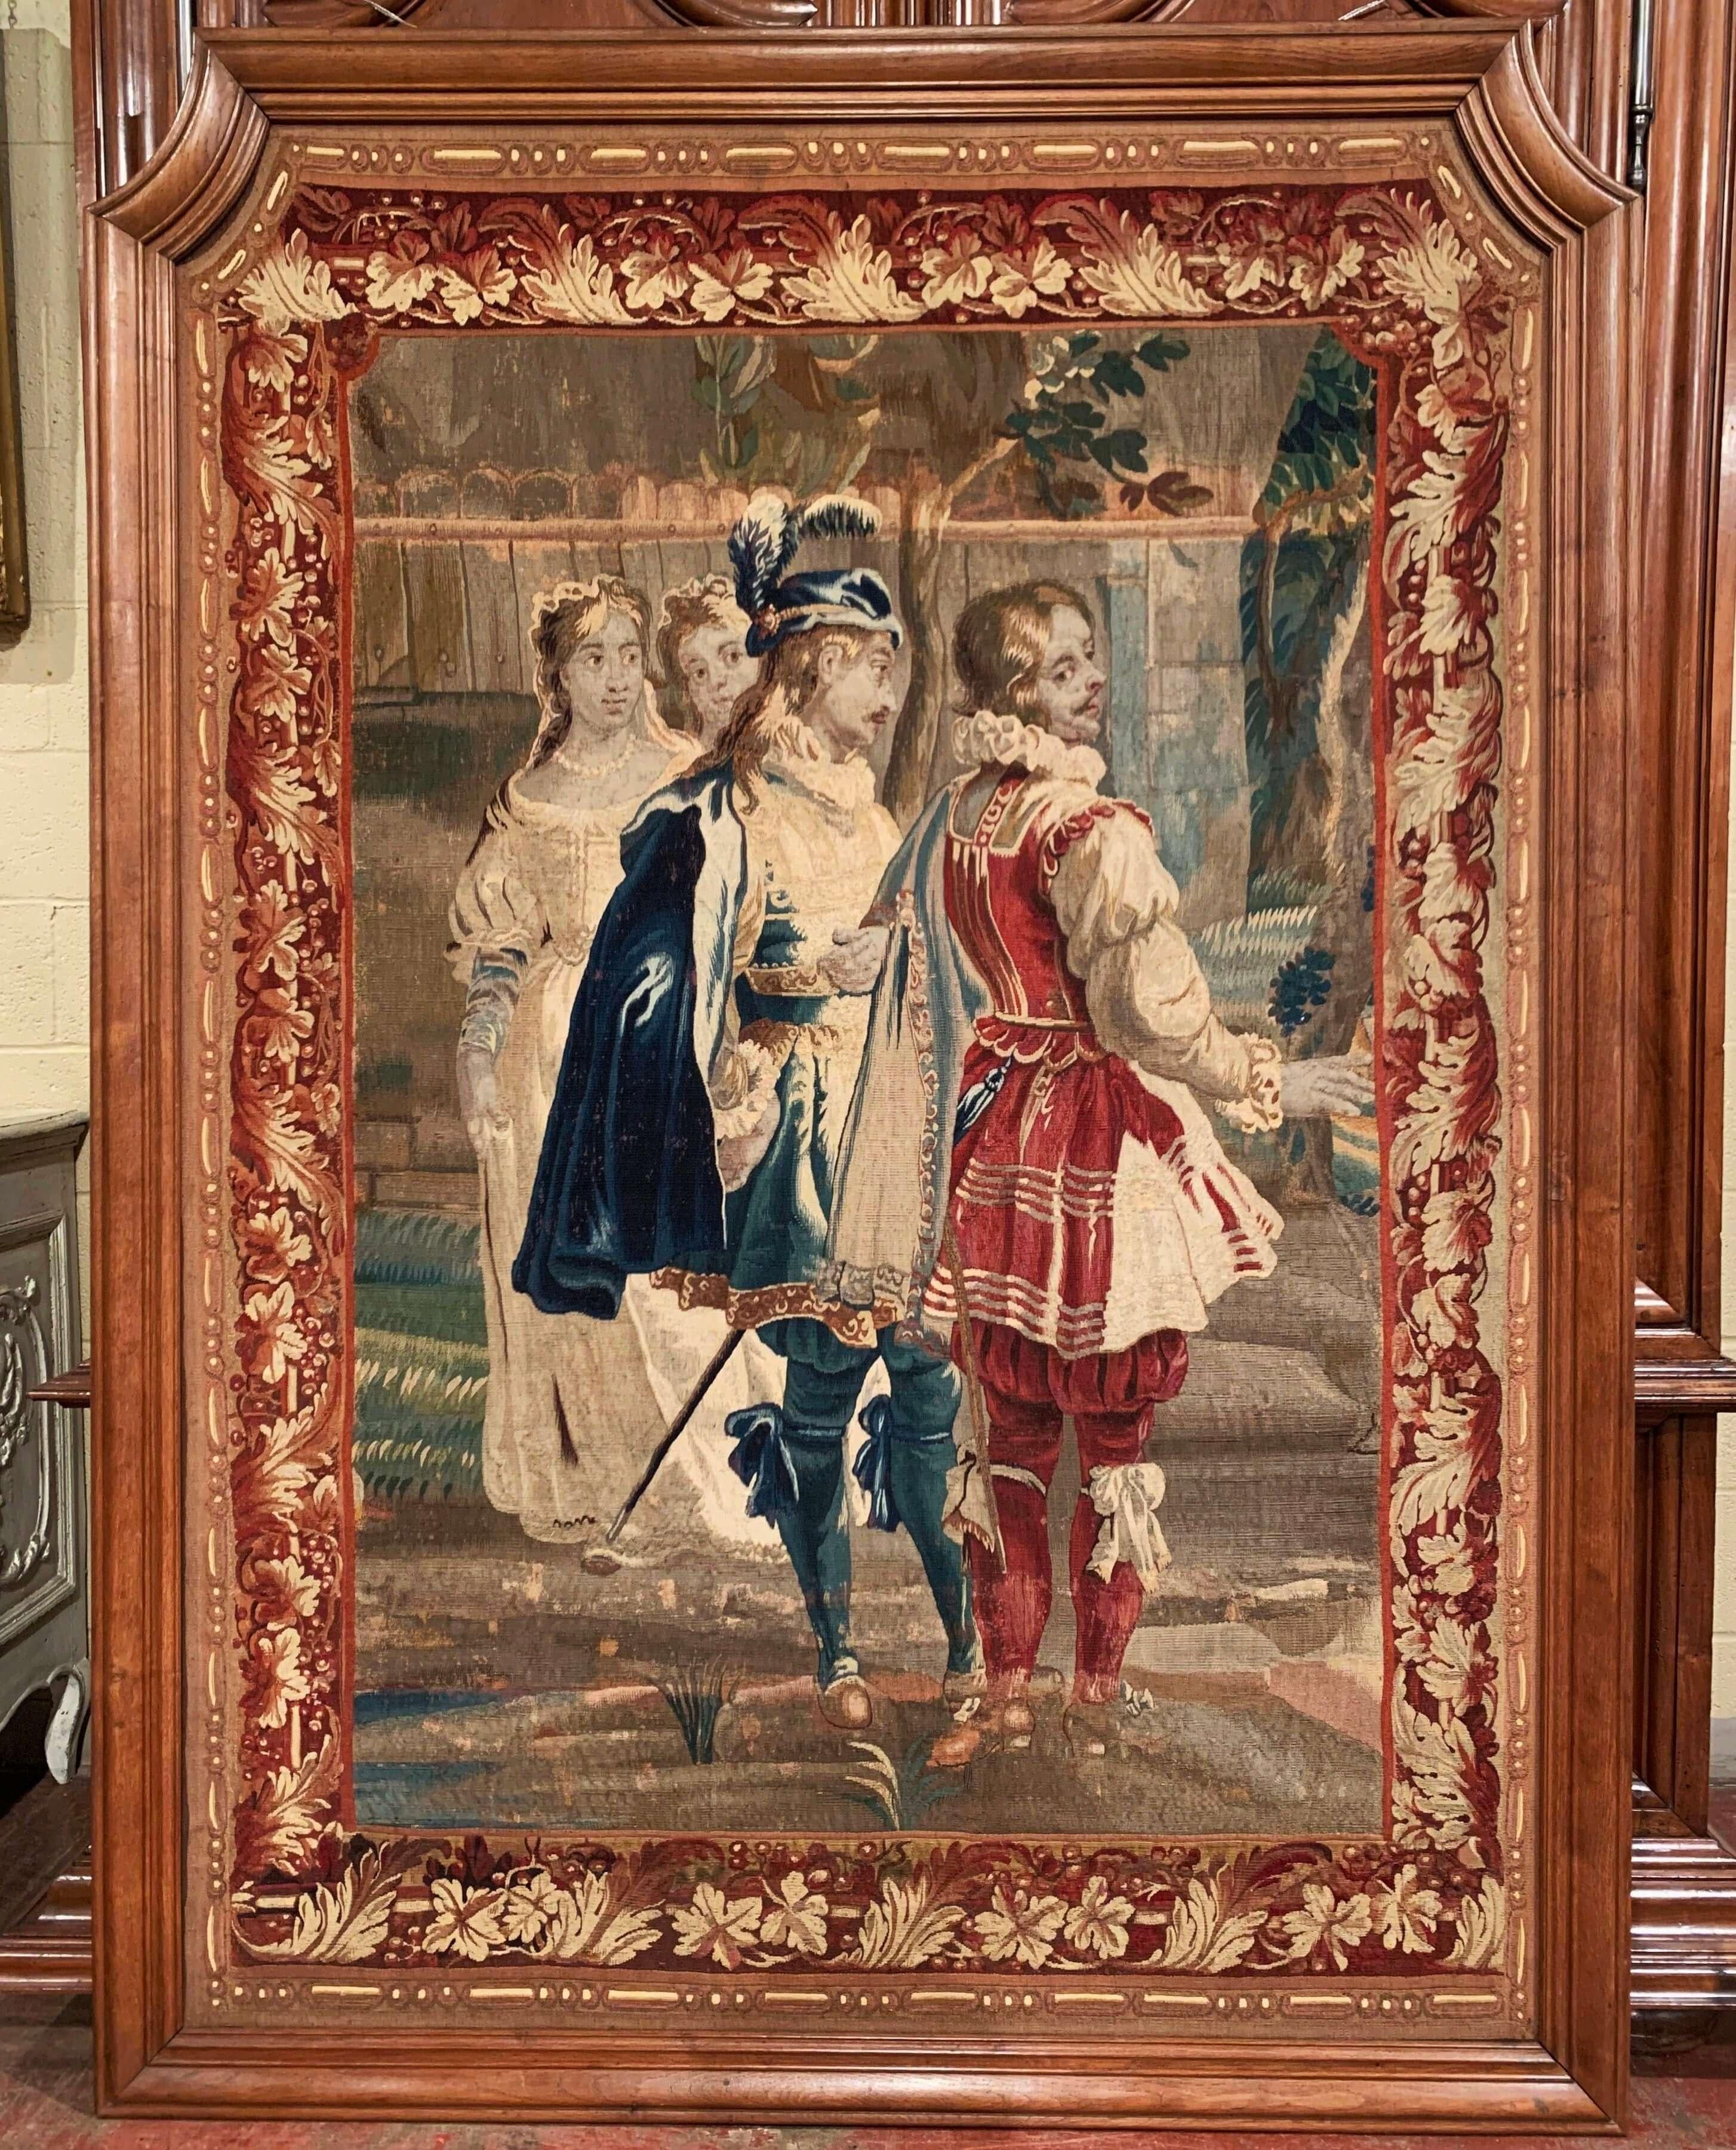 Hand-Carved 18th Century French Handwoven Aubusson Panel Tapestry in Original Oak Frame For Sale